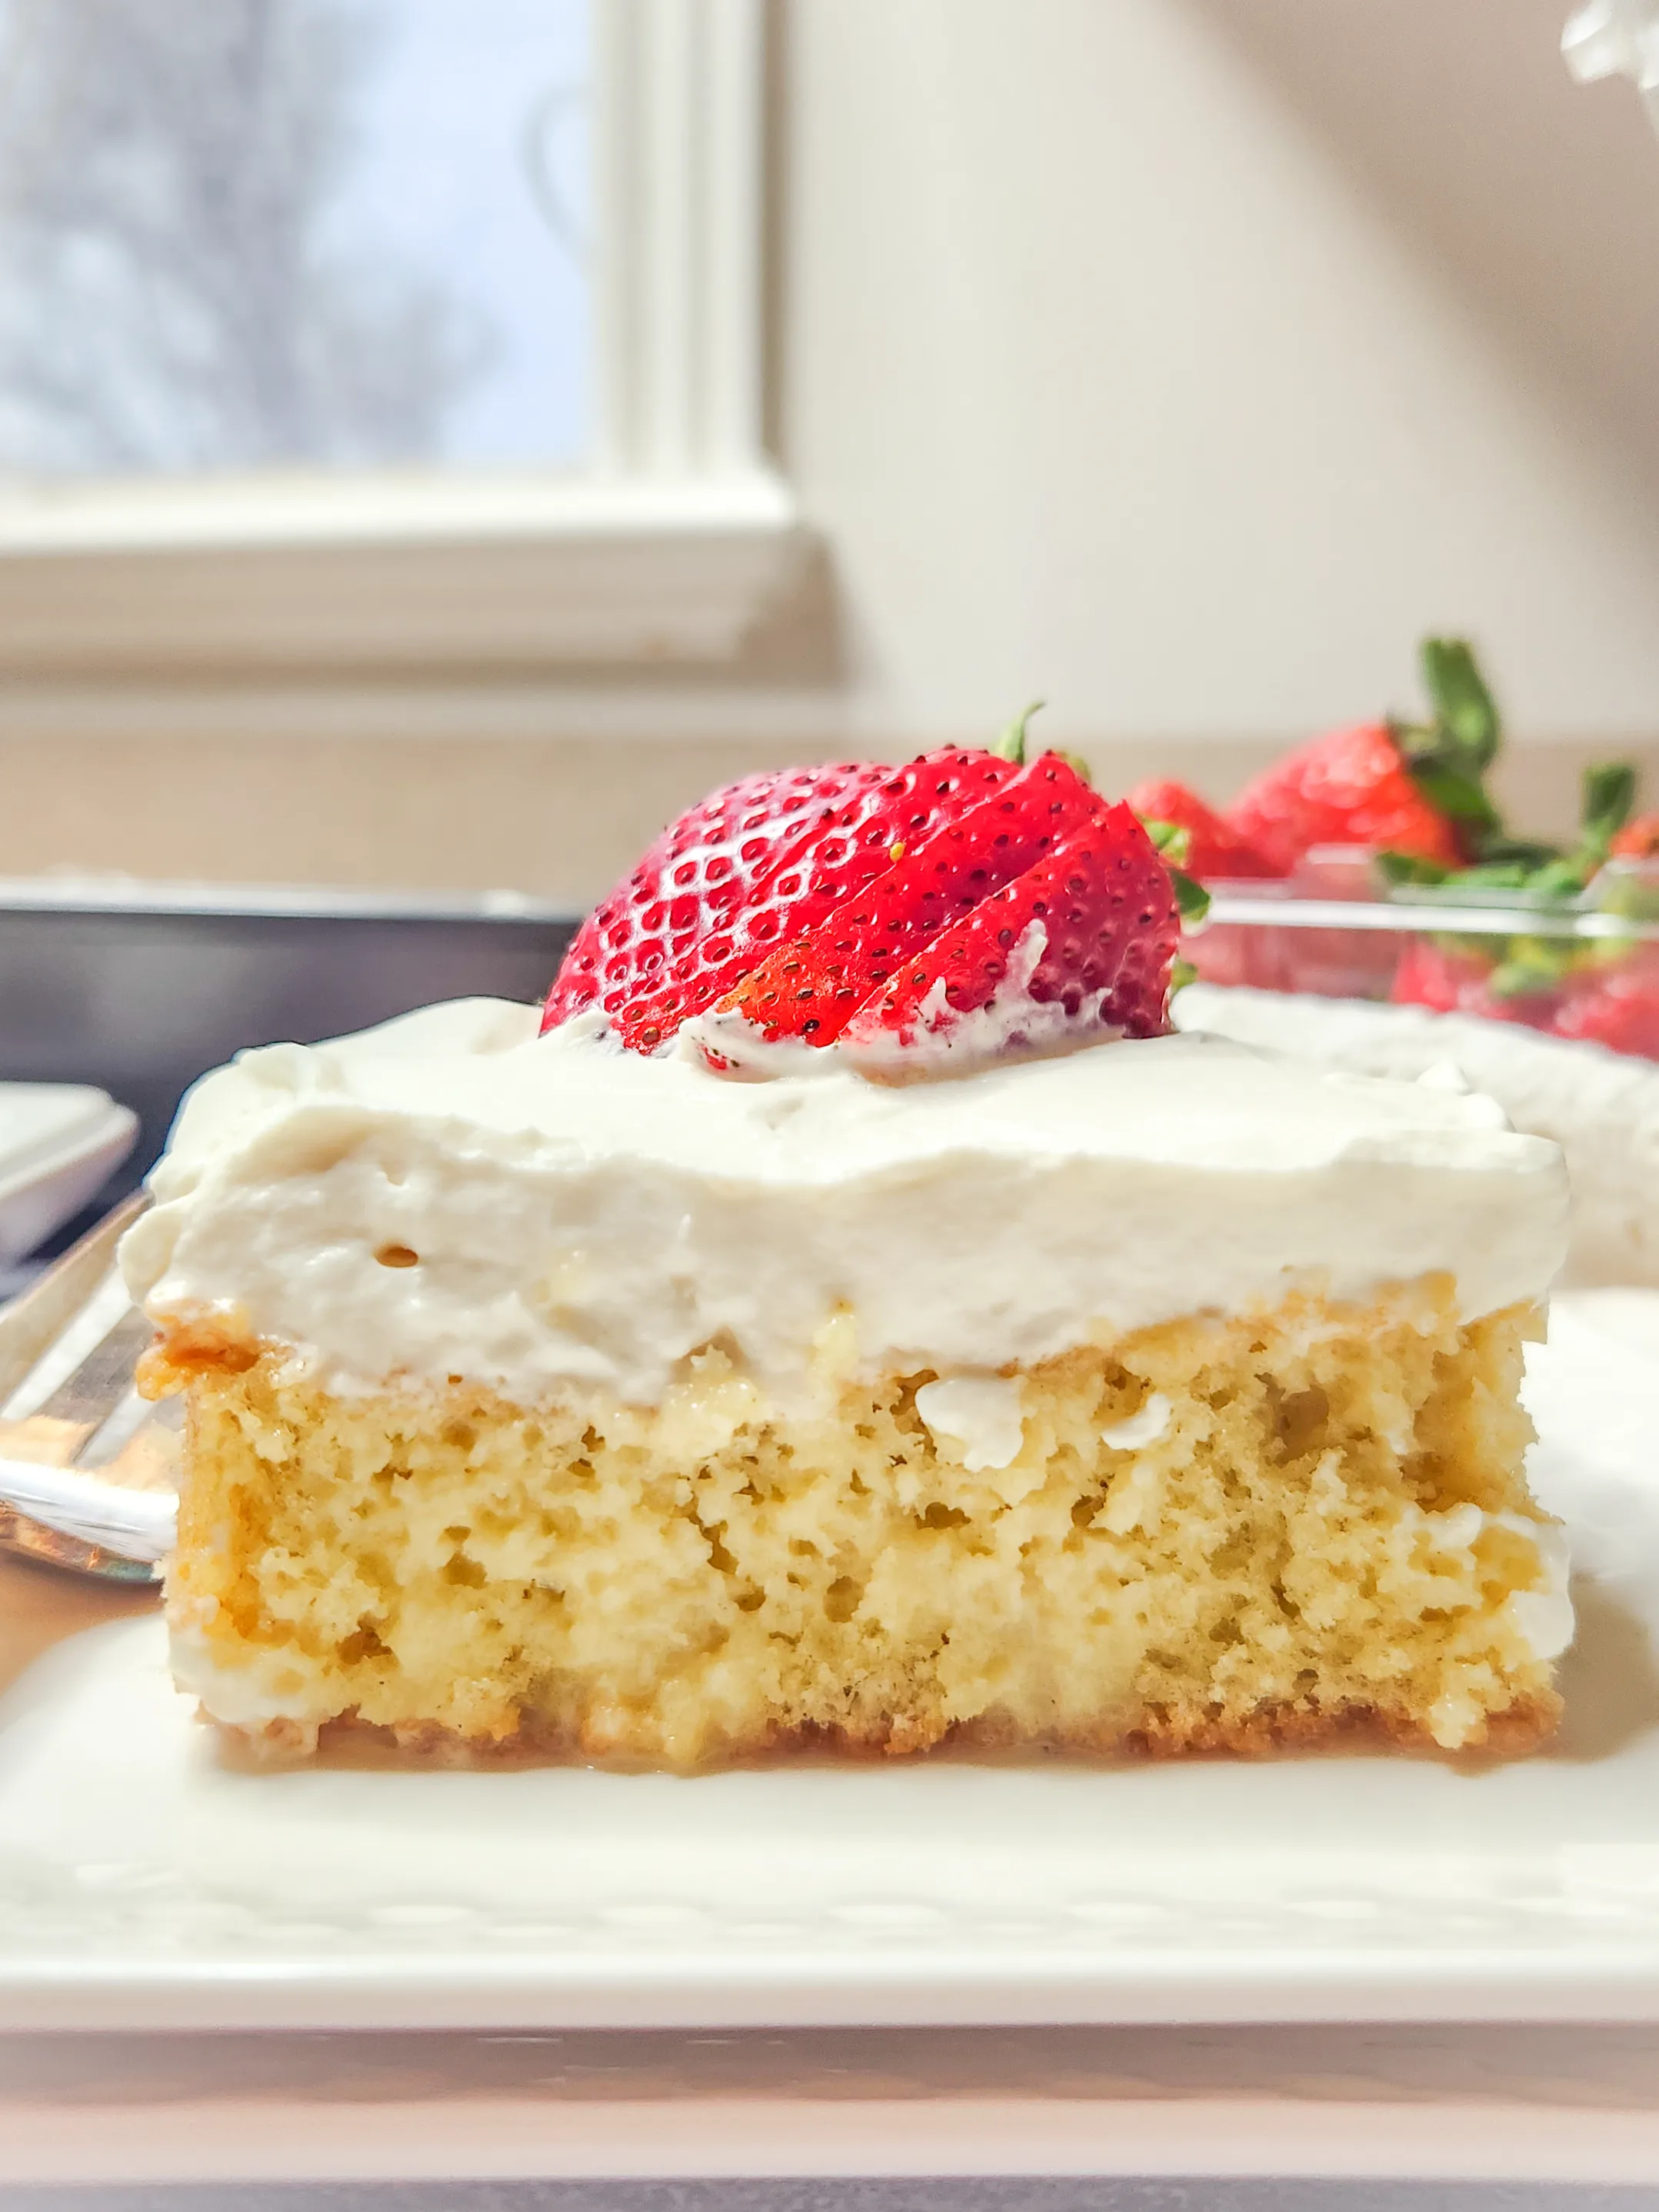 a slice of gluten free tres leches sits on a white ceramic plate. It is topped with a thick layer of whipped cream and sliced strawberries.